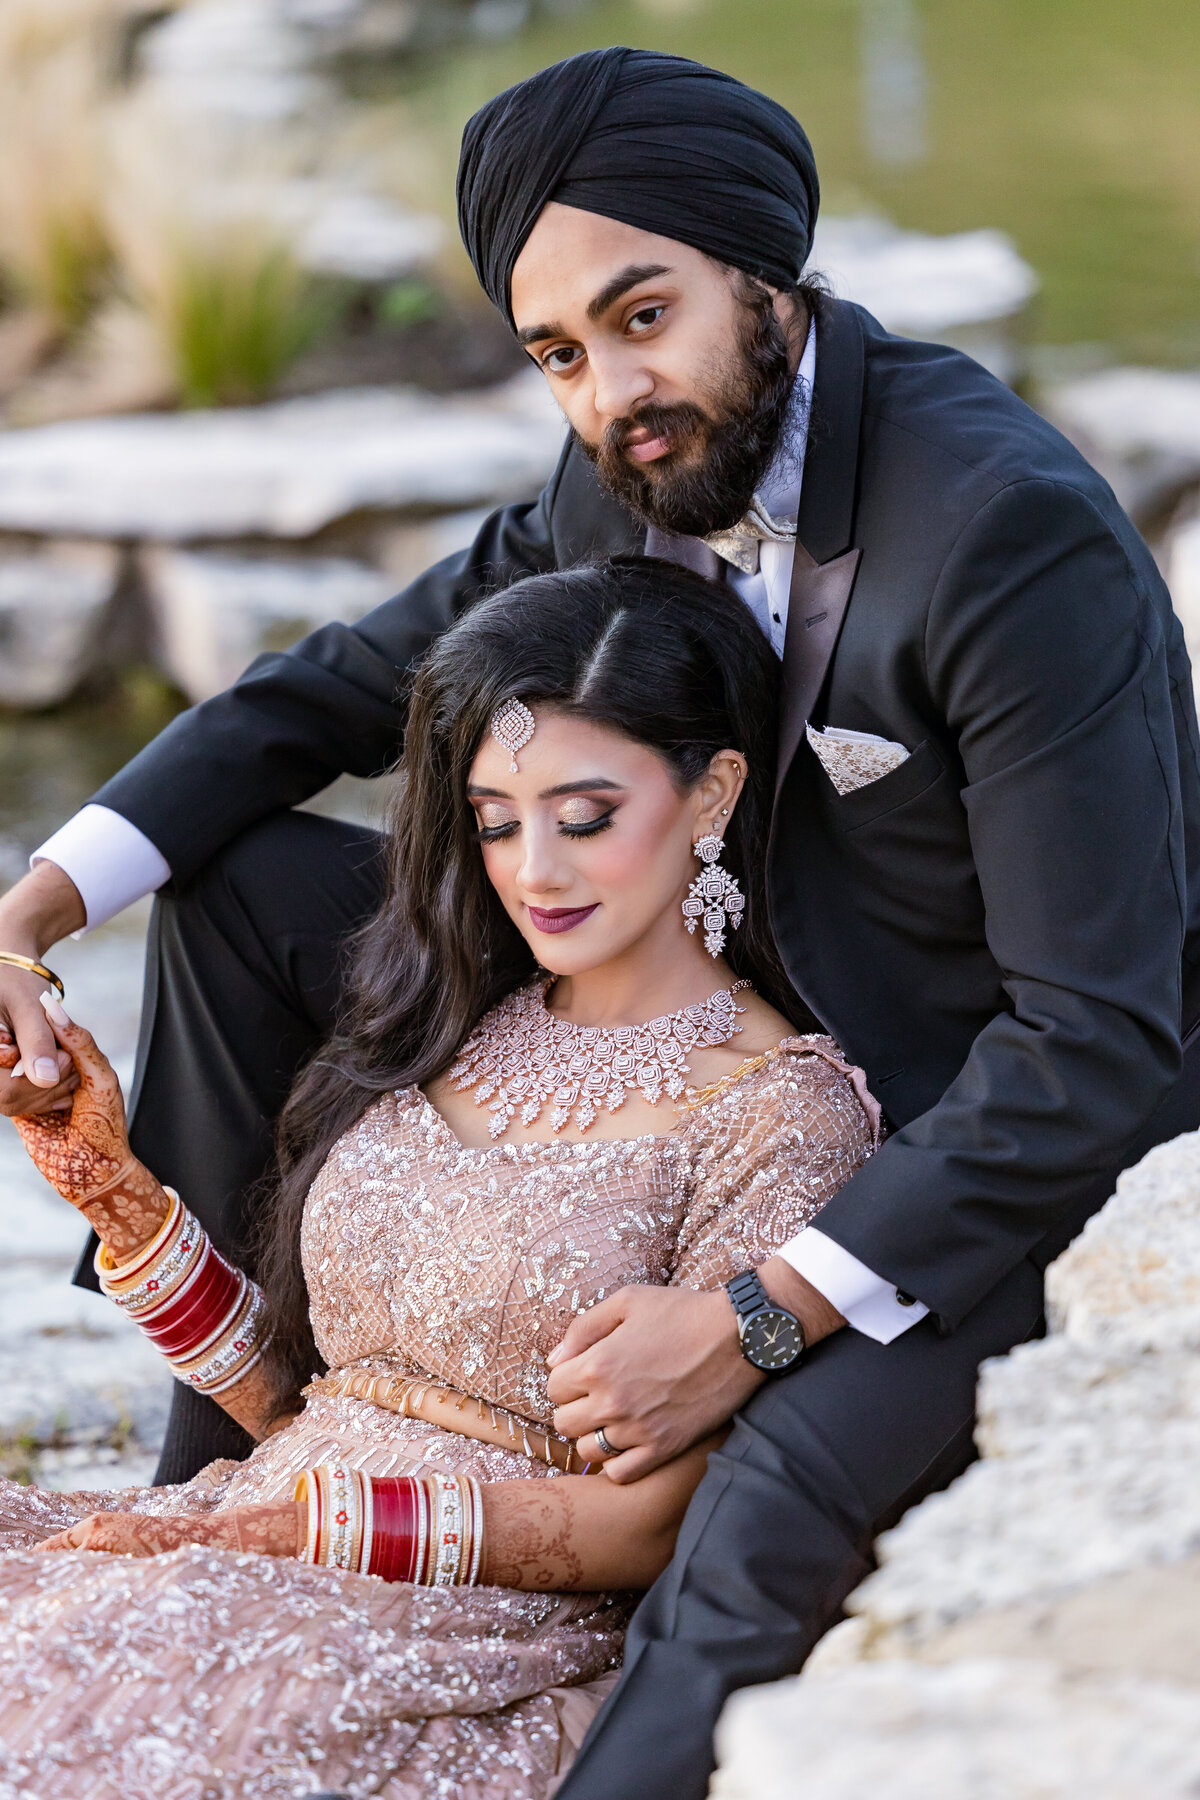 Bhuvana Dhinesh Photography is based out of Dallas, Houston and Austin, primarily out of Texas but available for travel across the nation.